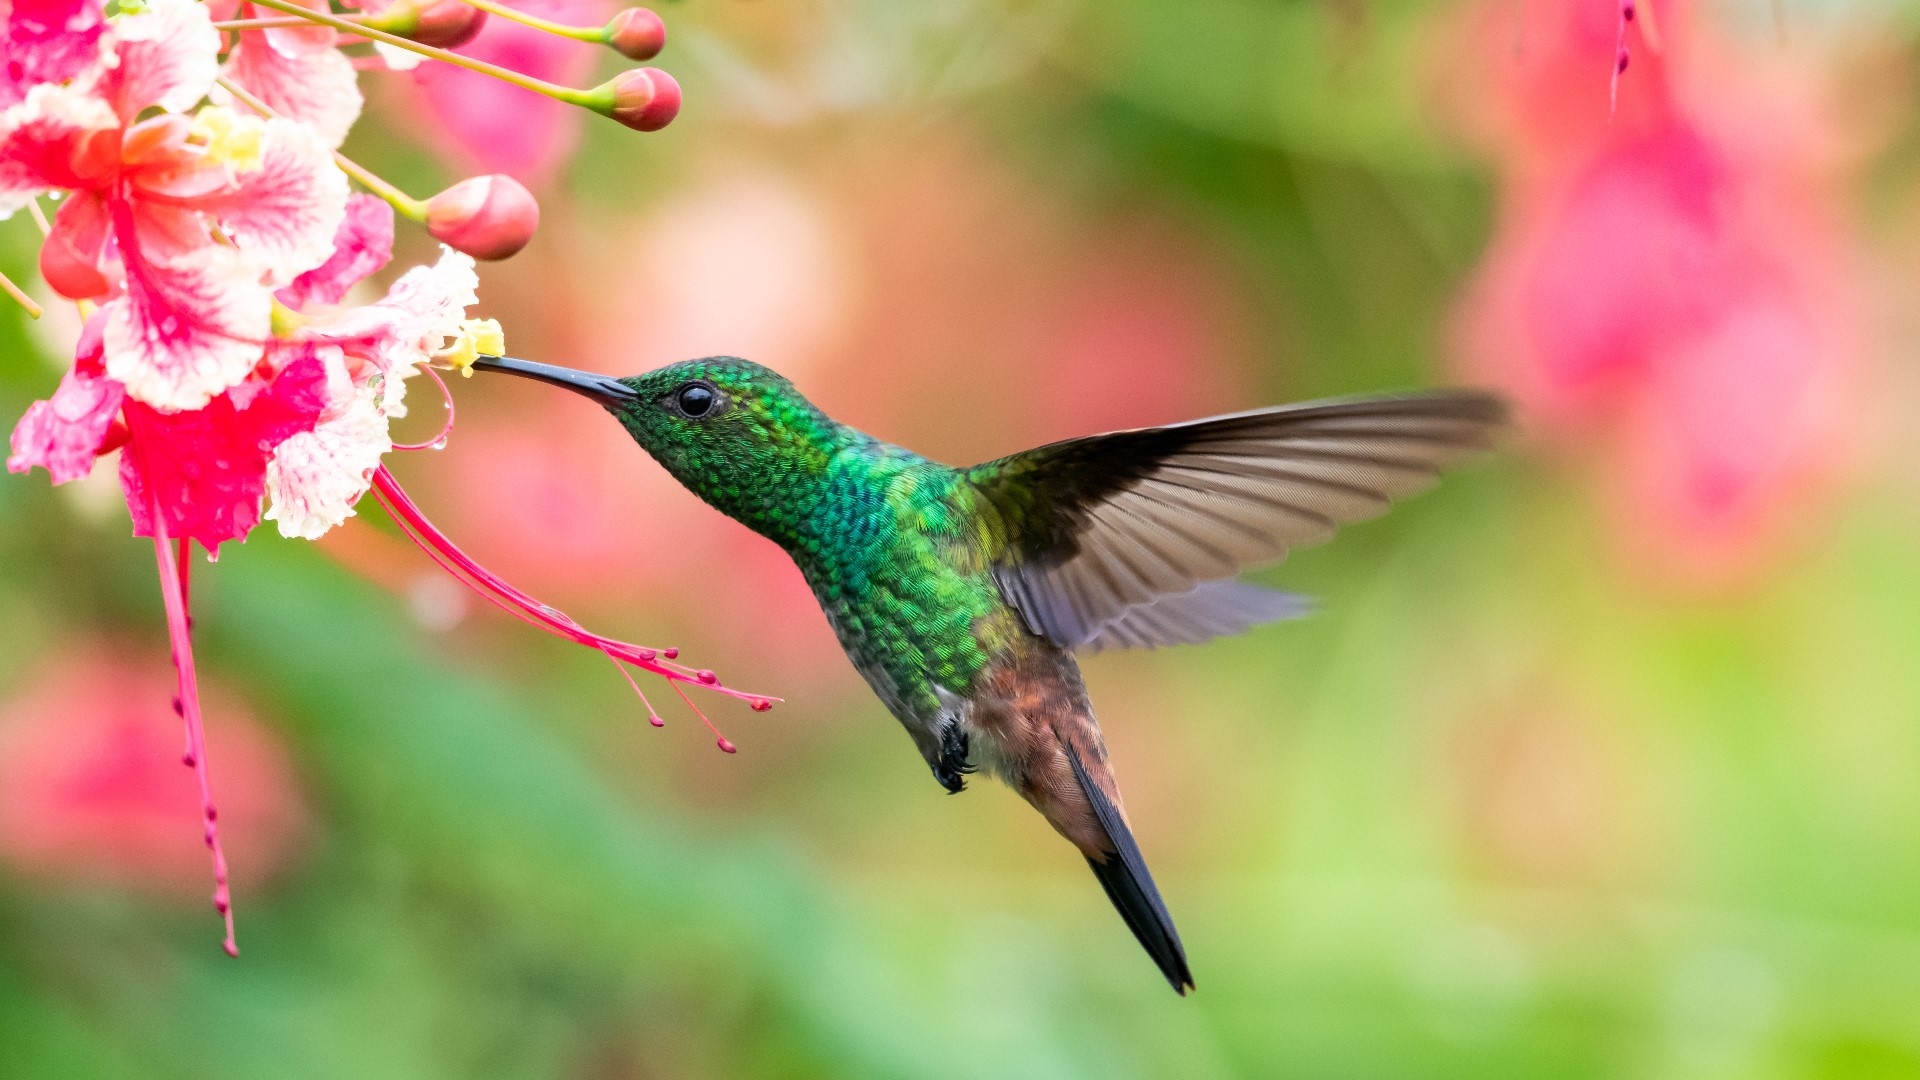 2 On Your Side's Claudine Ewing talks to gardening expert Jackie Albarella about the best plants to attract hummingbirds to your garden.